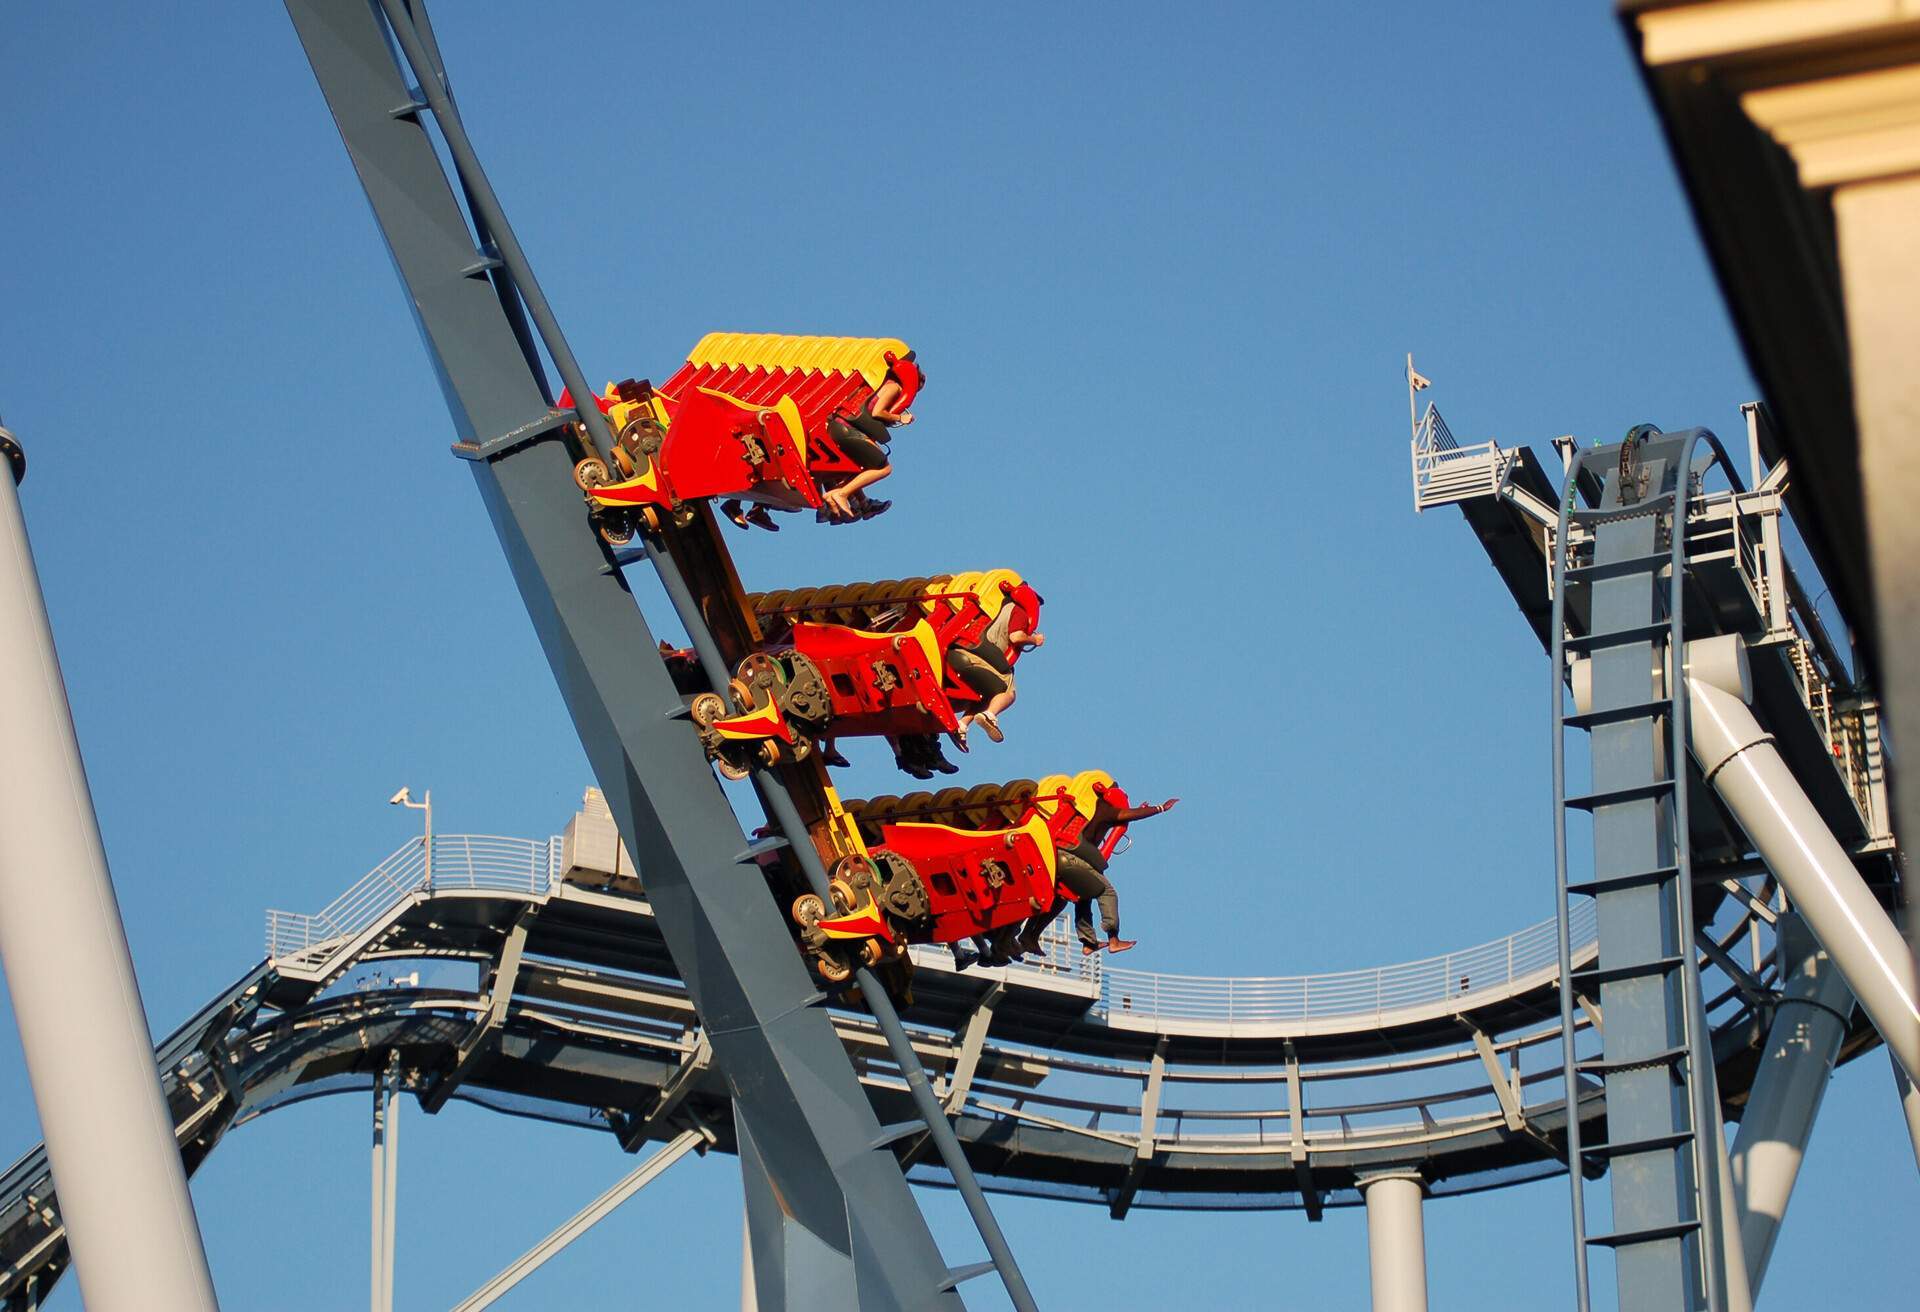 A roller coaster car hurtling downward at high speed, with the riders' feet exhilaratingly flying out in front of them.